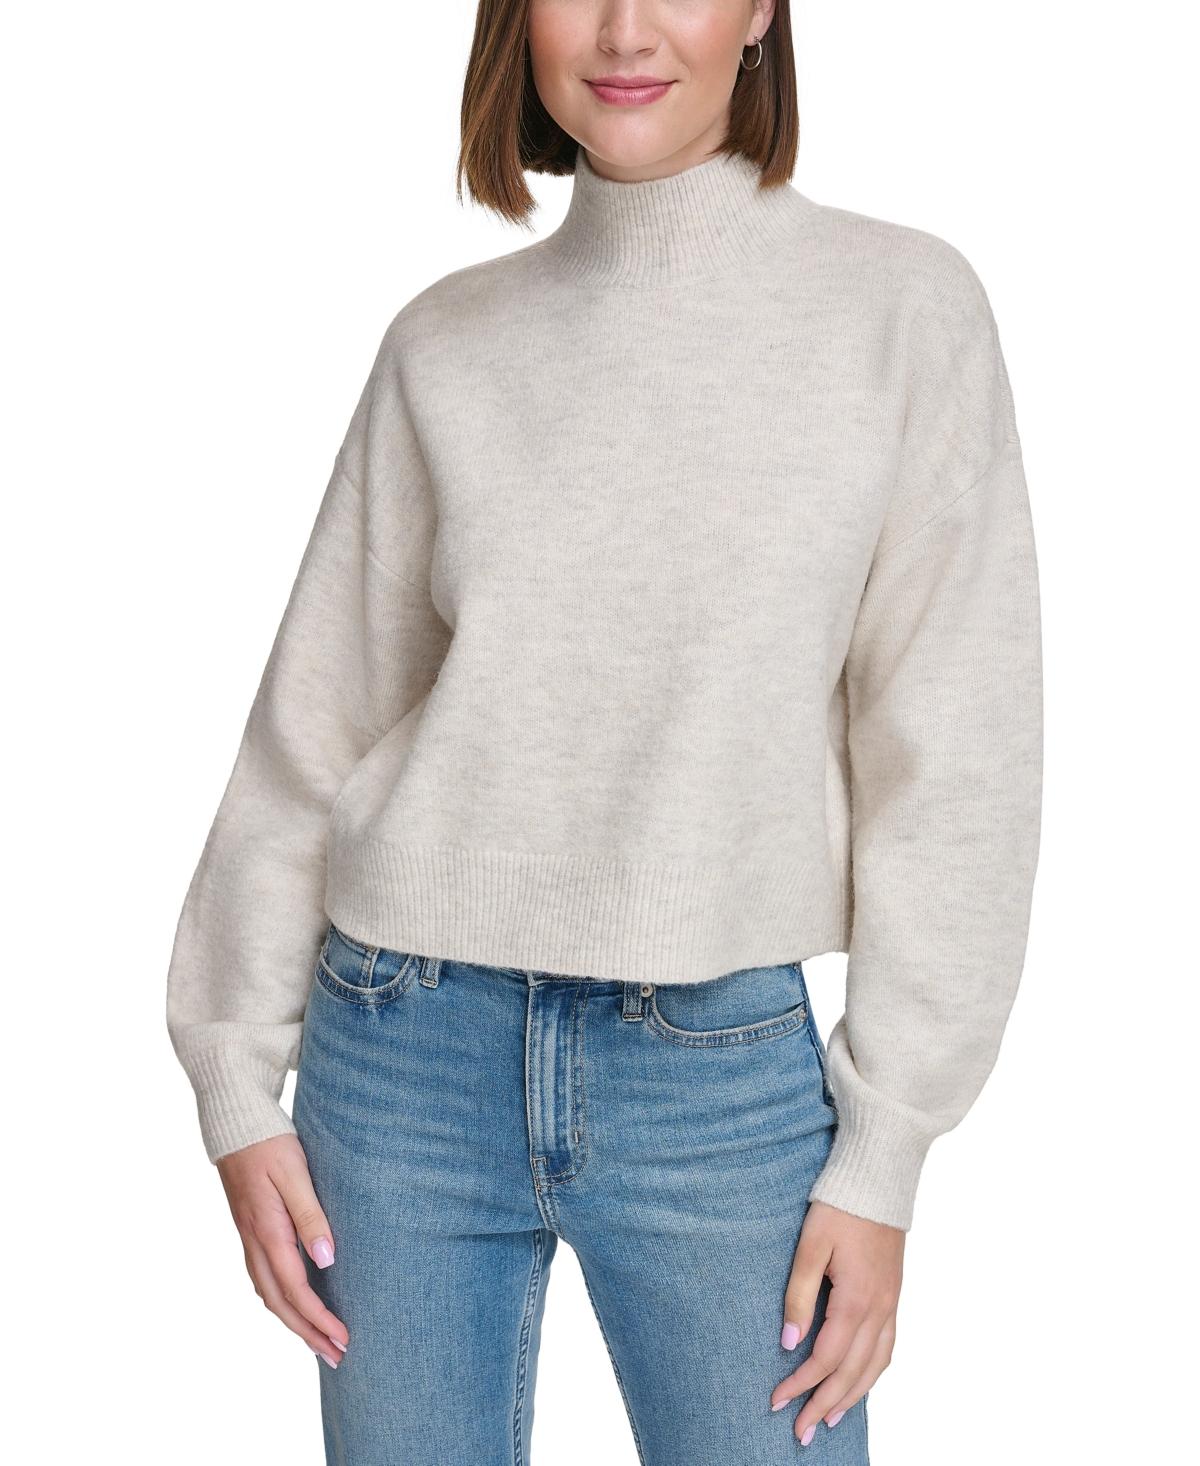 Calvin Klein Boxy Cropped Long | Sweater Neck Mock Lyst in Sleeve Gray